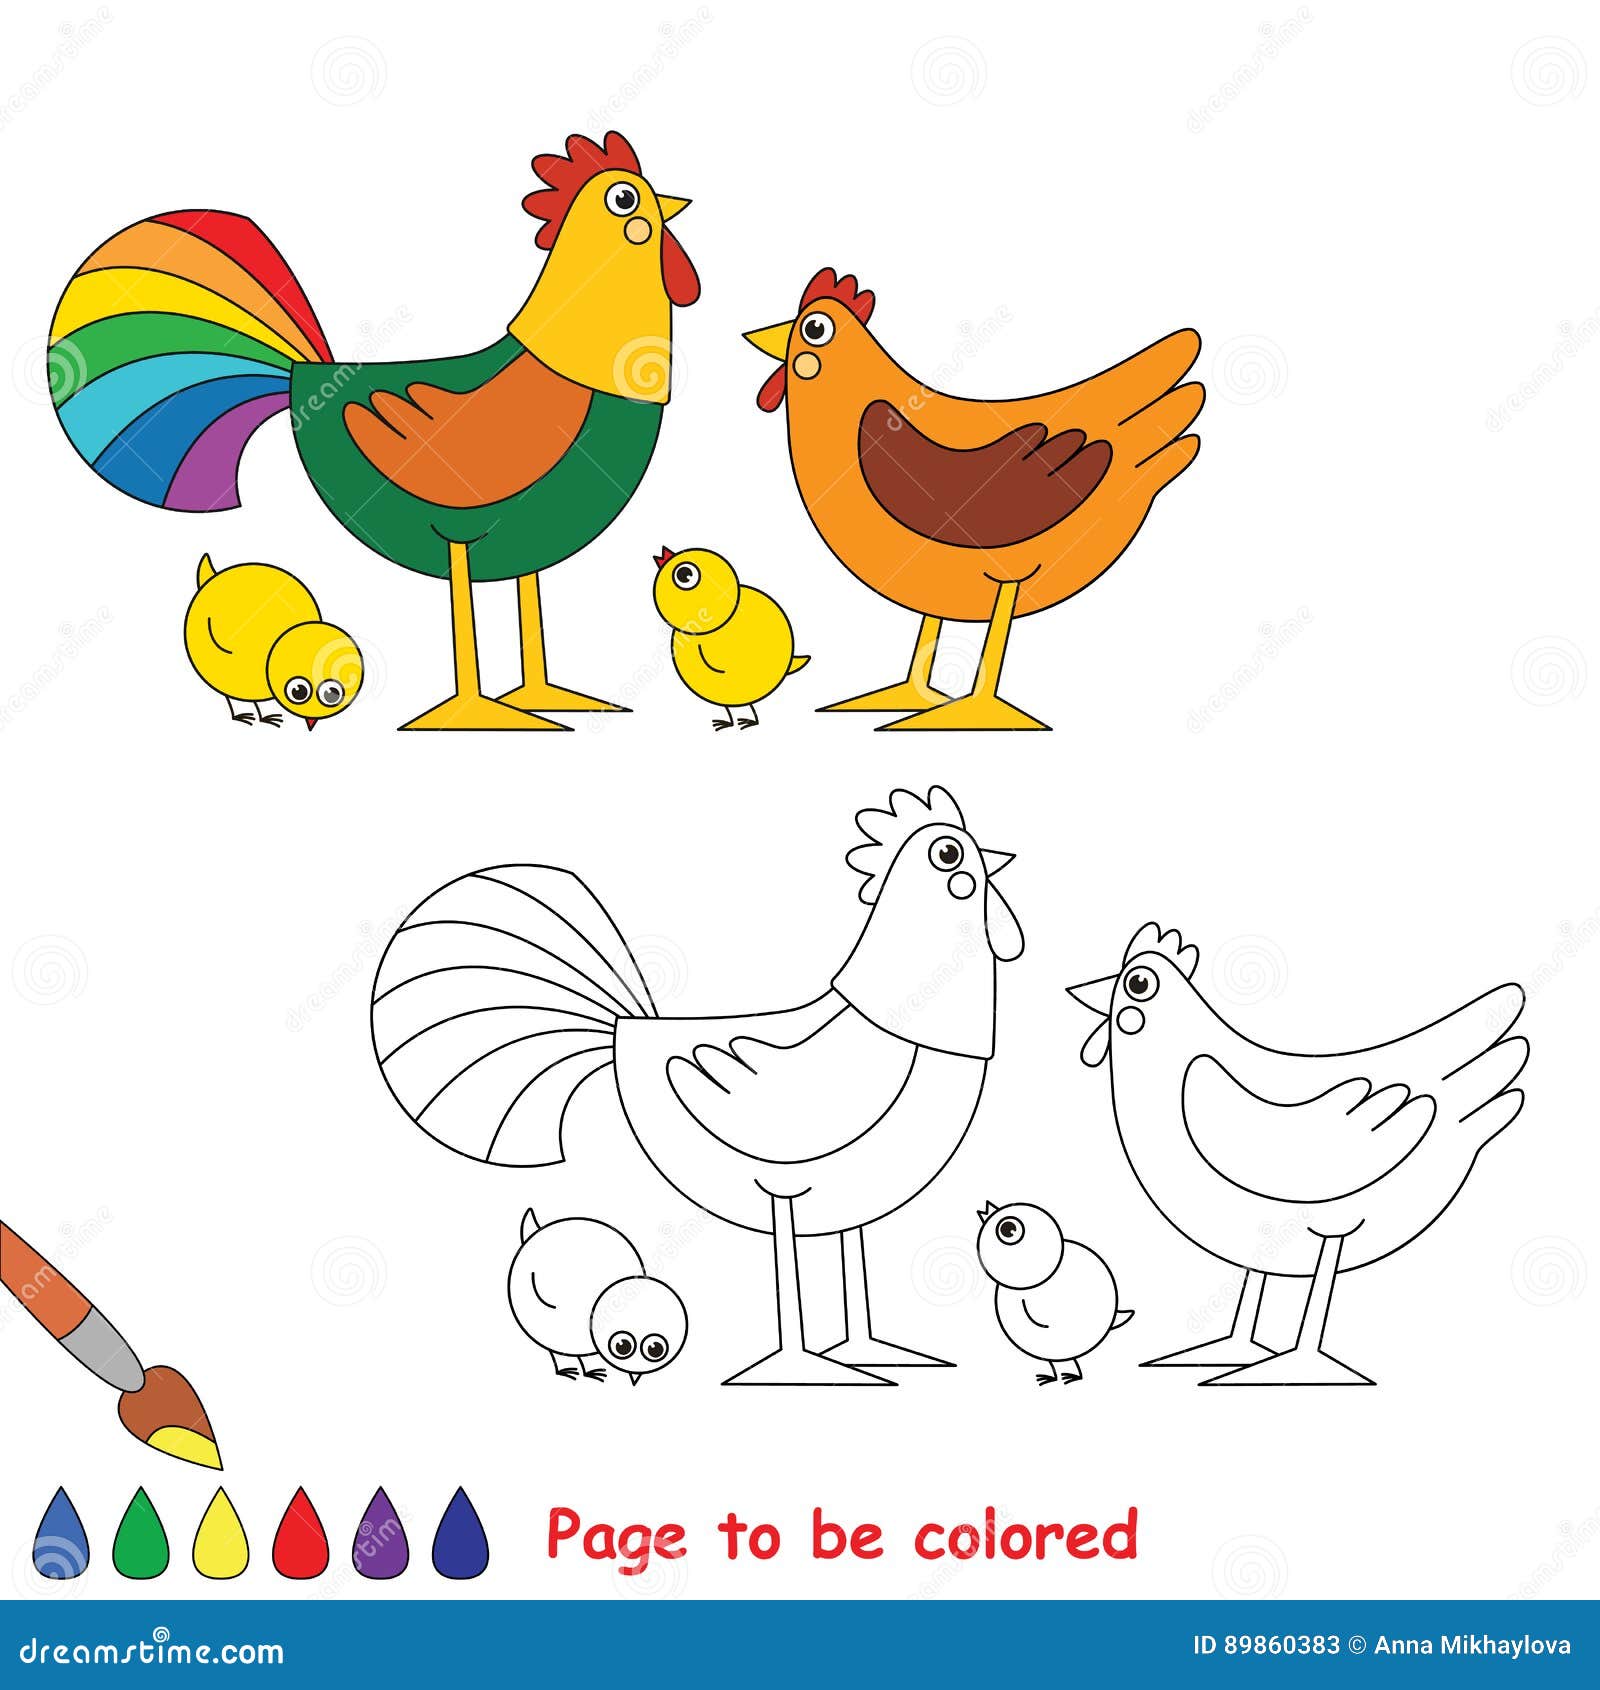 A Pretty Talent Blog: Paint a Chicken in Water-soluble Pencils